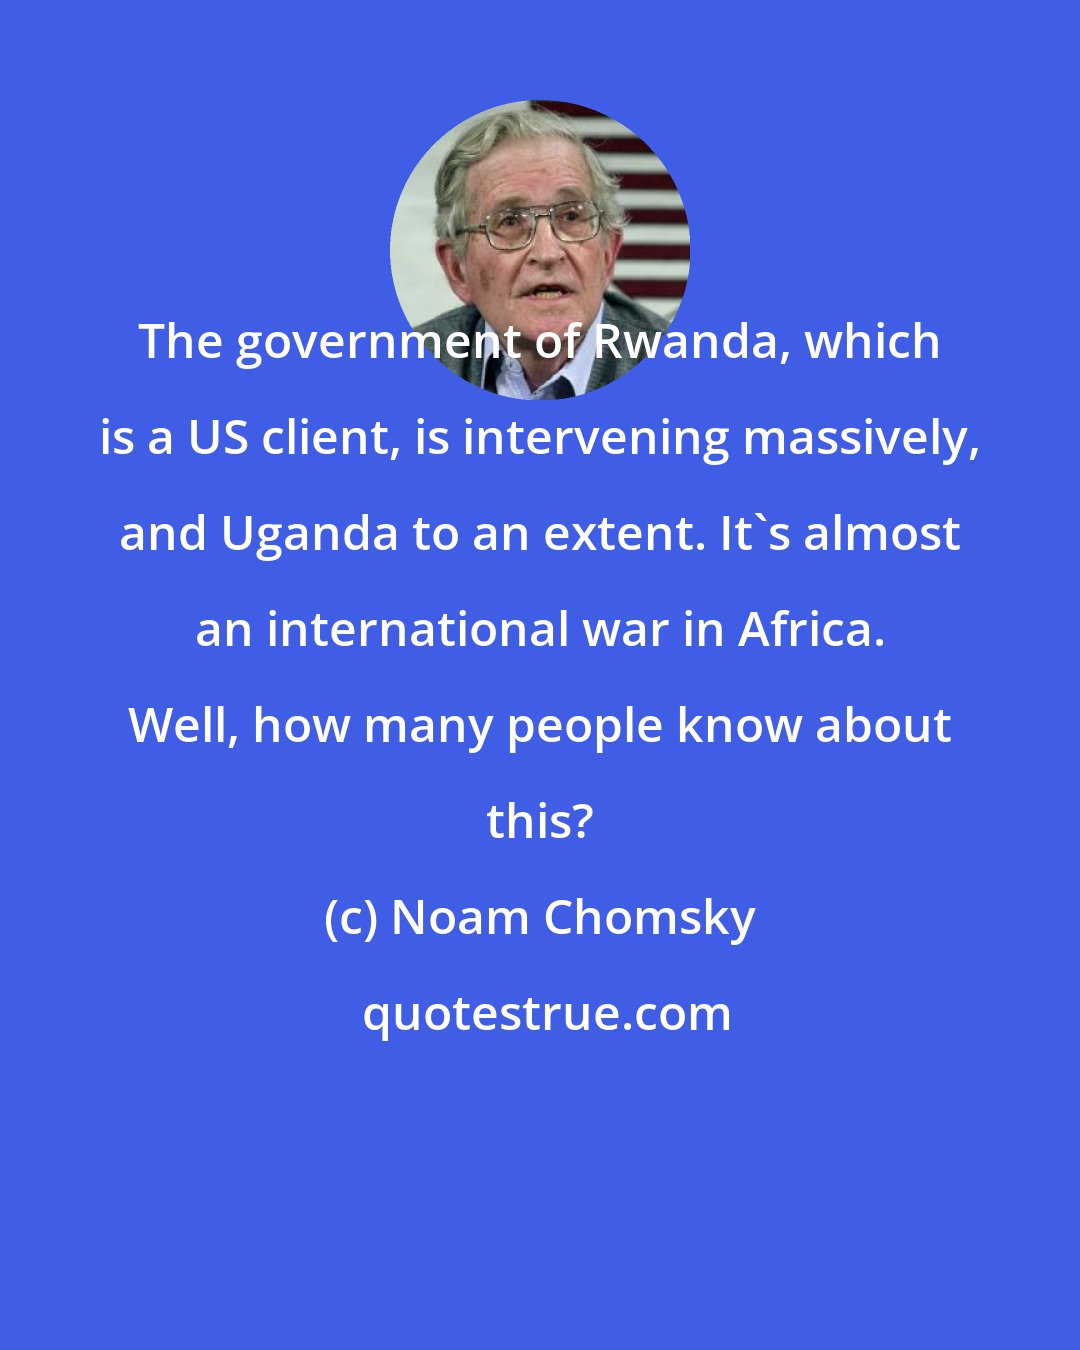 Noam Chomsky: The government of Rwanda, which is a US client, is intervening massively, and Uganda to an extent. It's almost an international war in Africa. Well, how many people know about this?